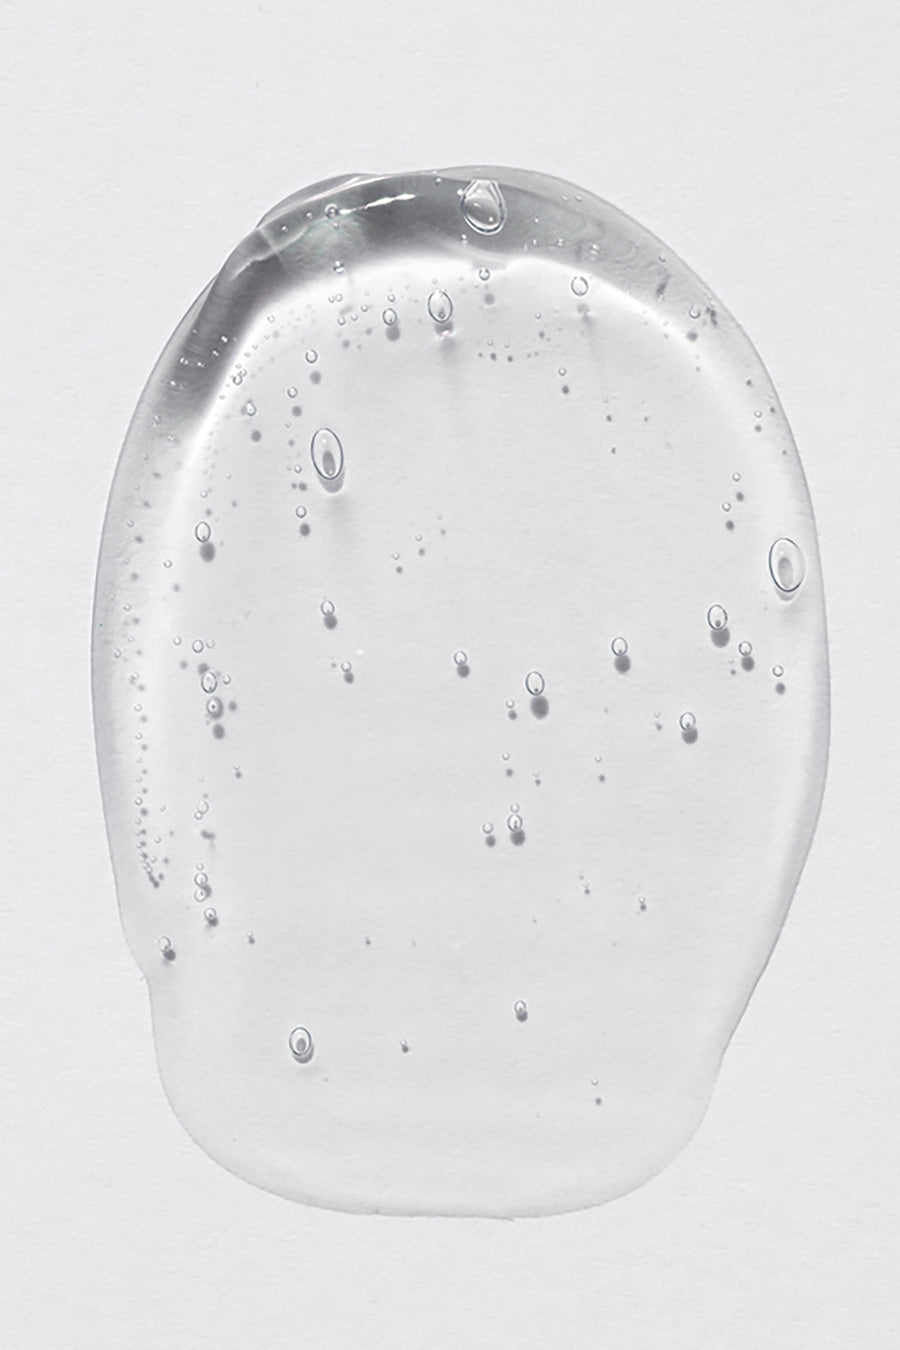 drop of body wash on white background